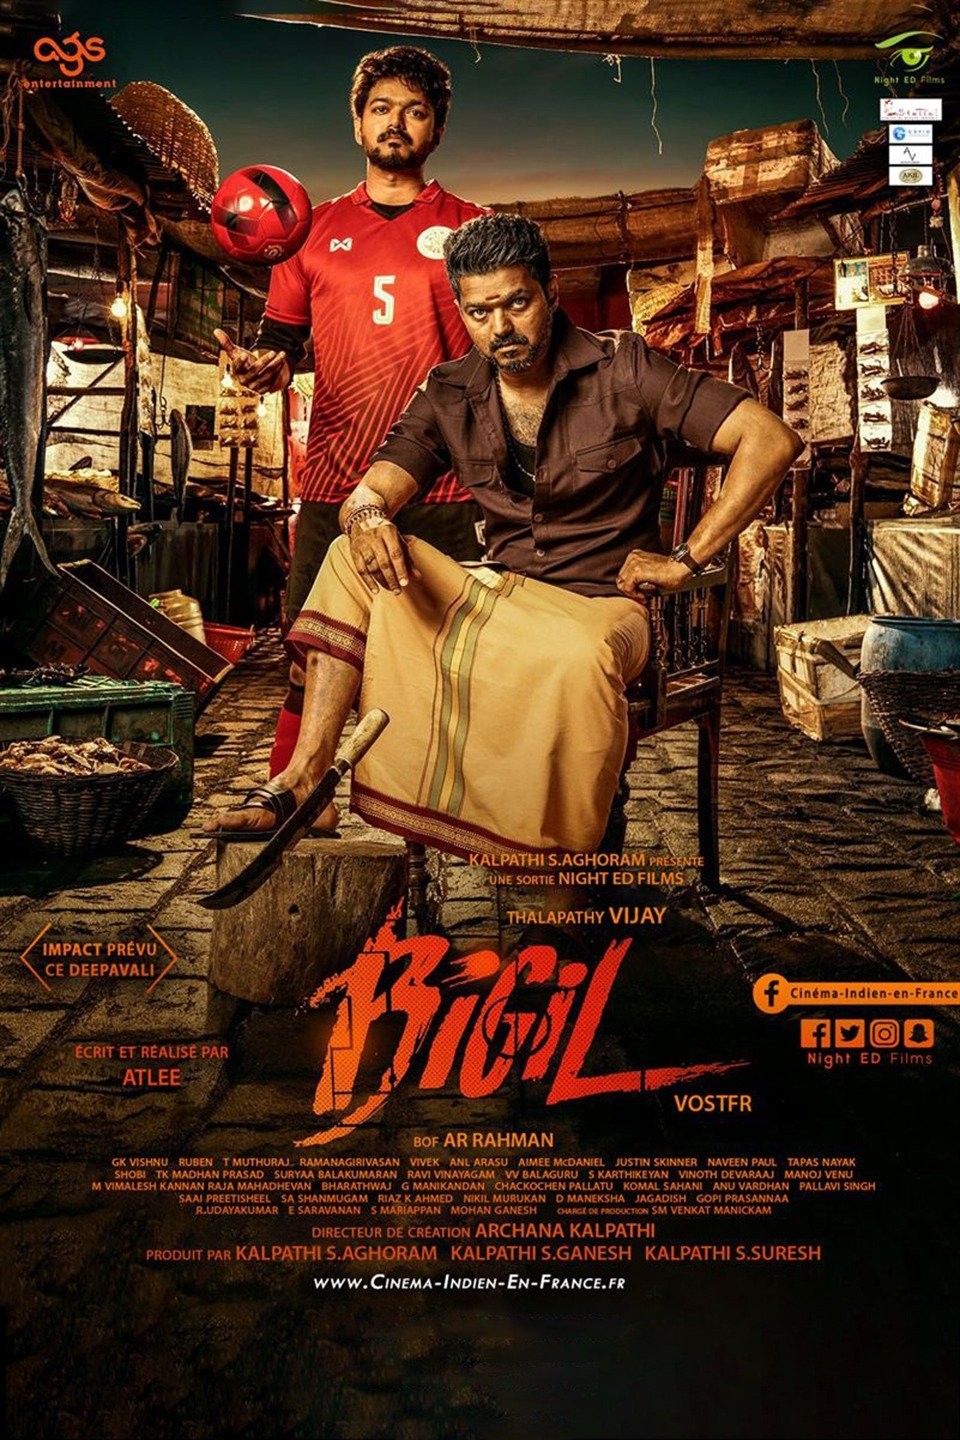 Final schedule of shoot for Vijay's 'Bigil' to be completed 10 Aug |  Breaking News 24x7